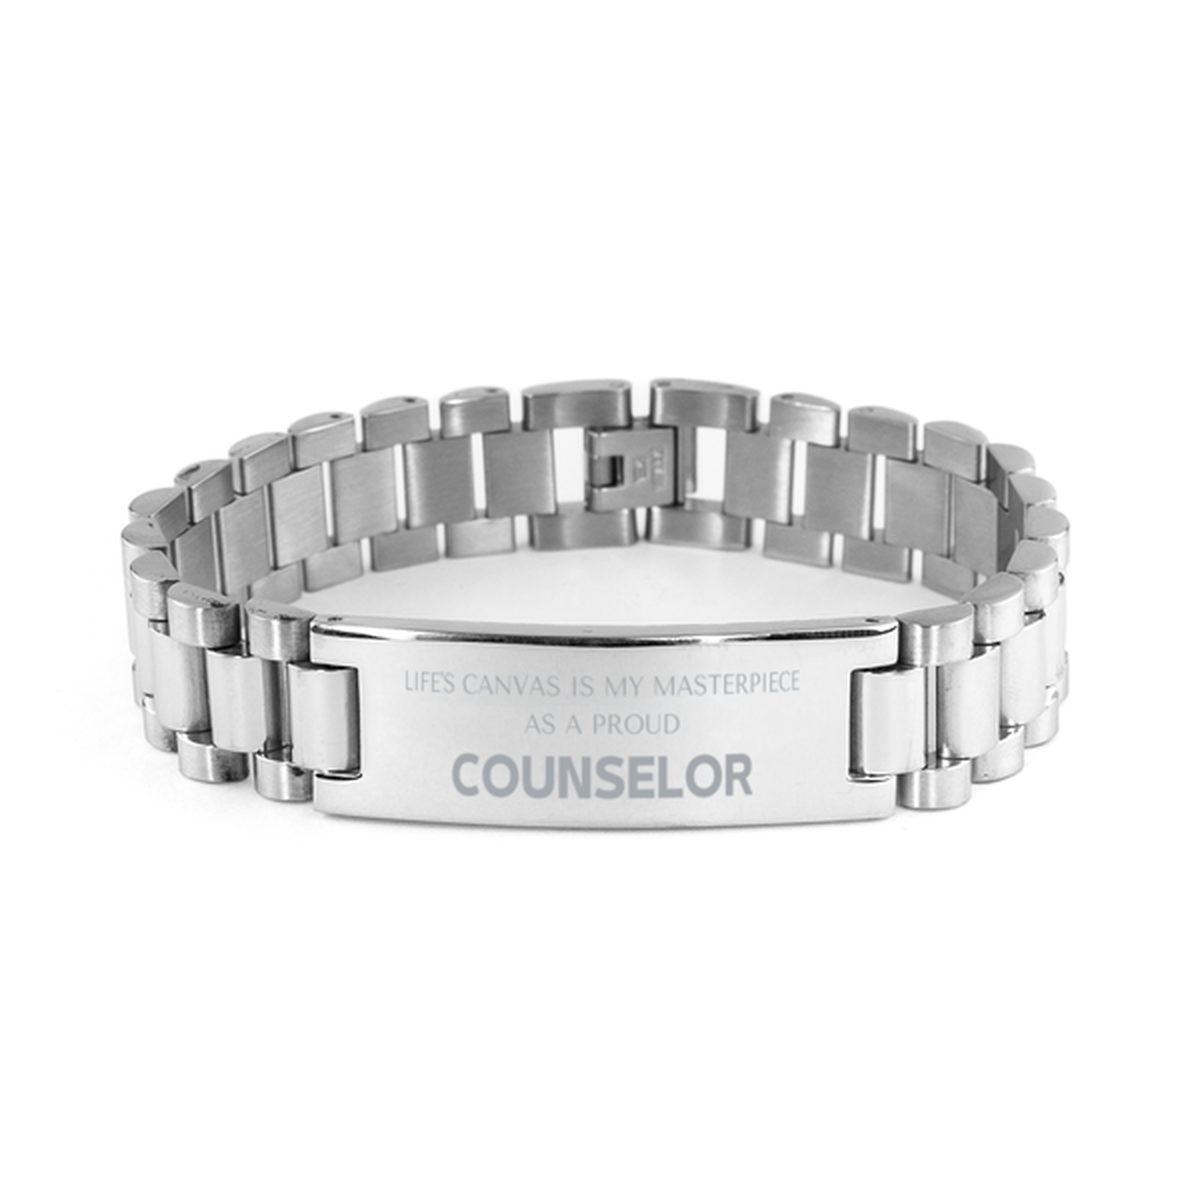 Proud Counselor Gifts, Life's canvas is my masterpiece, Epic Birthday Christmas Unique Ladder Stainless Steel Bracelet For Counselor, Coworkers, Men, Women, Friends